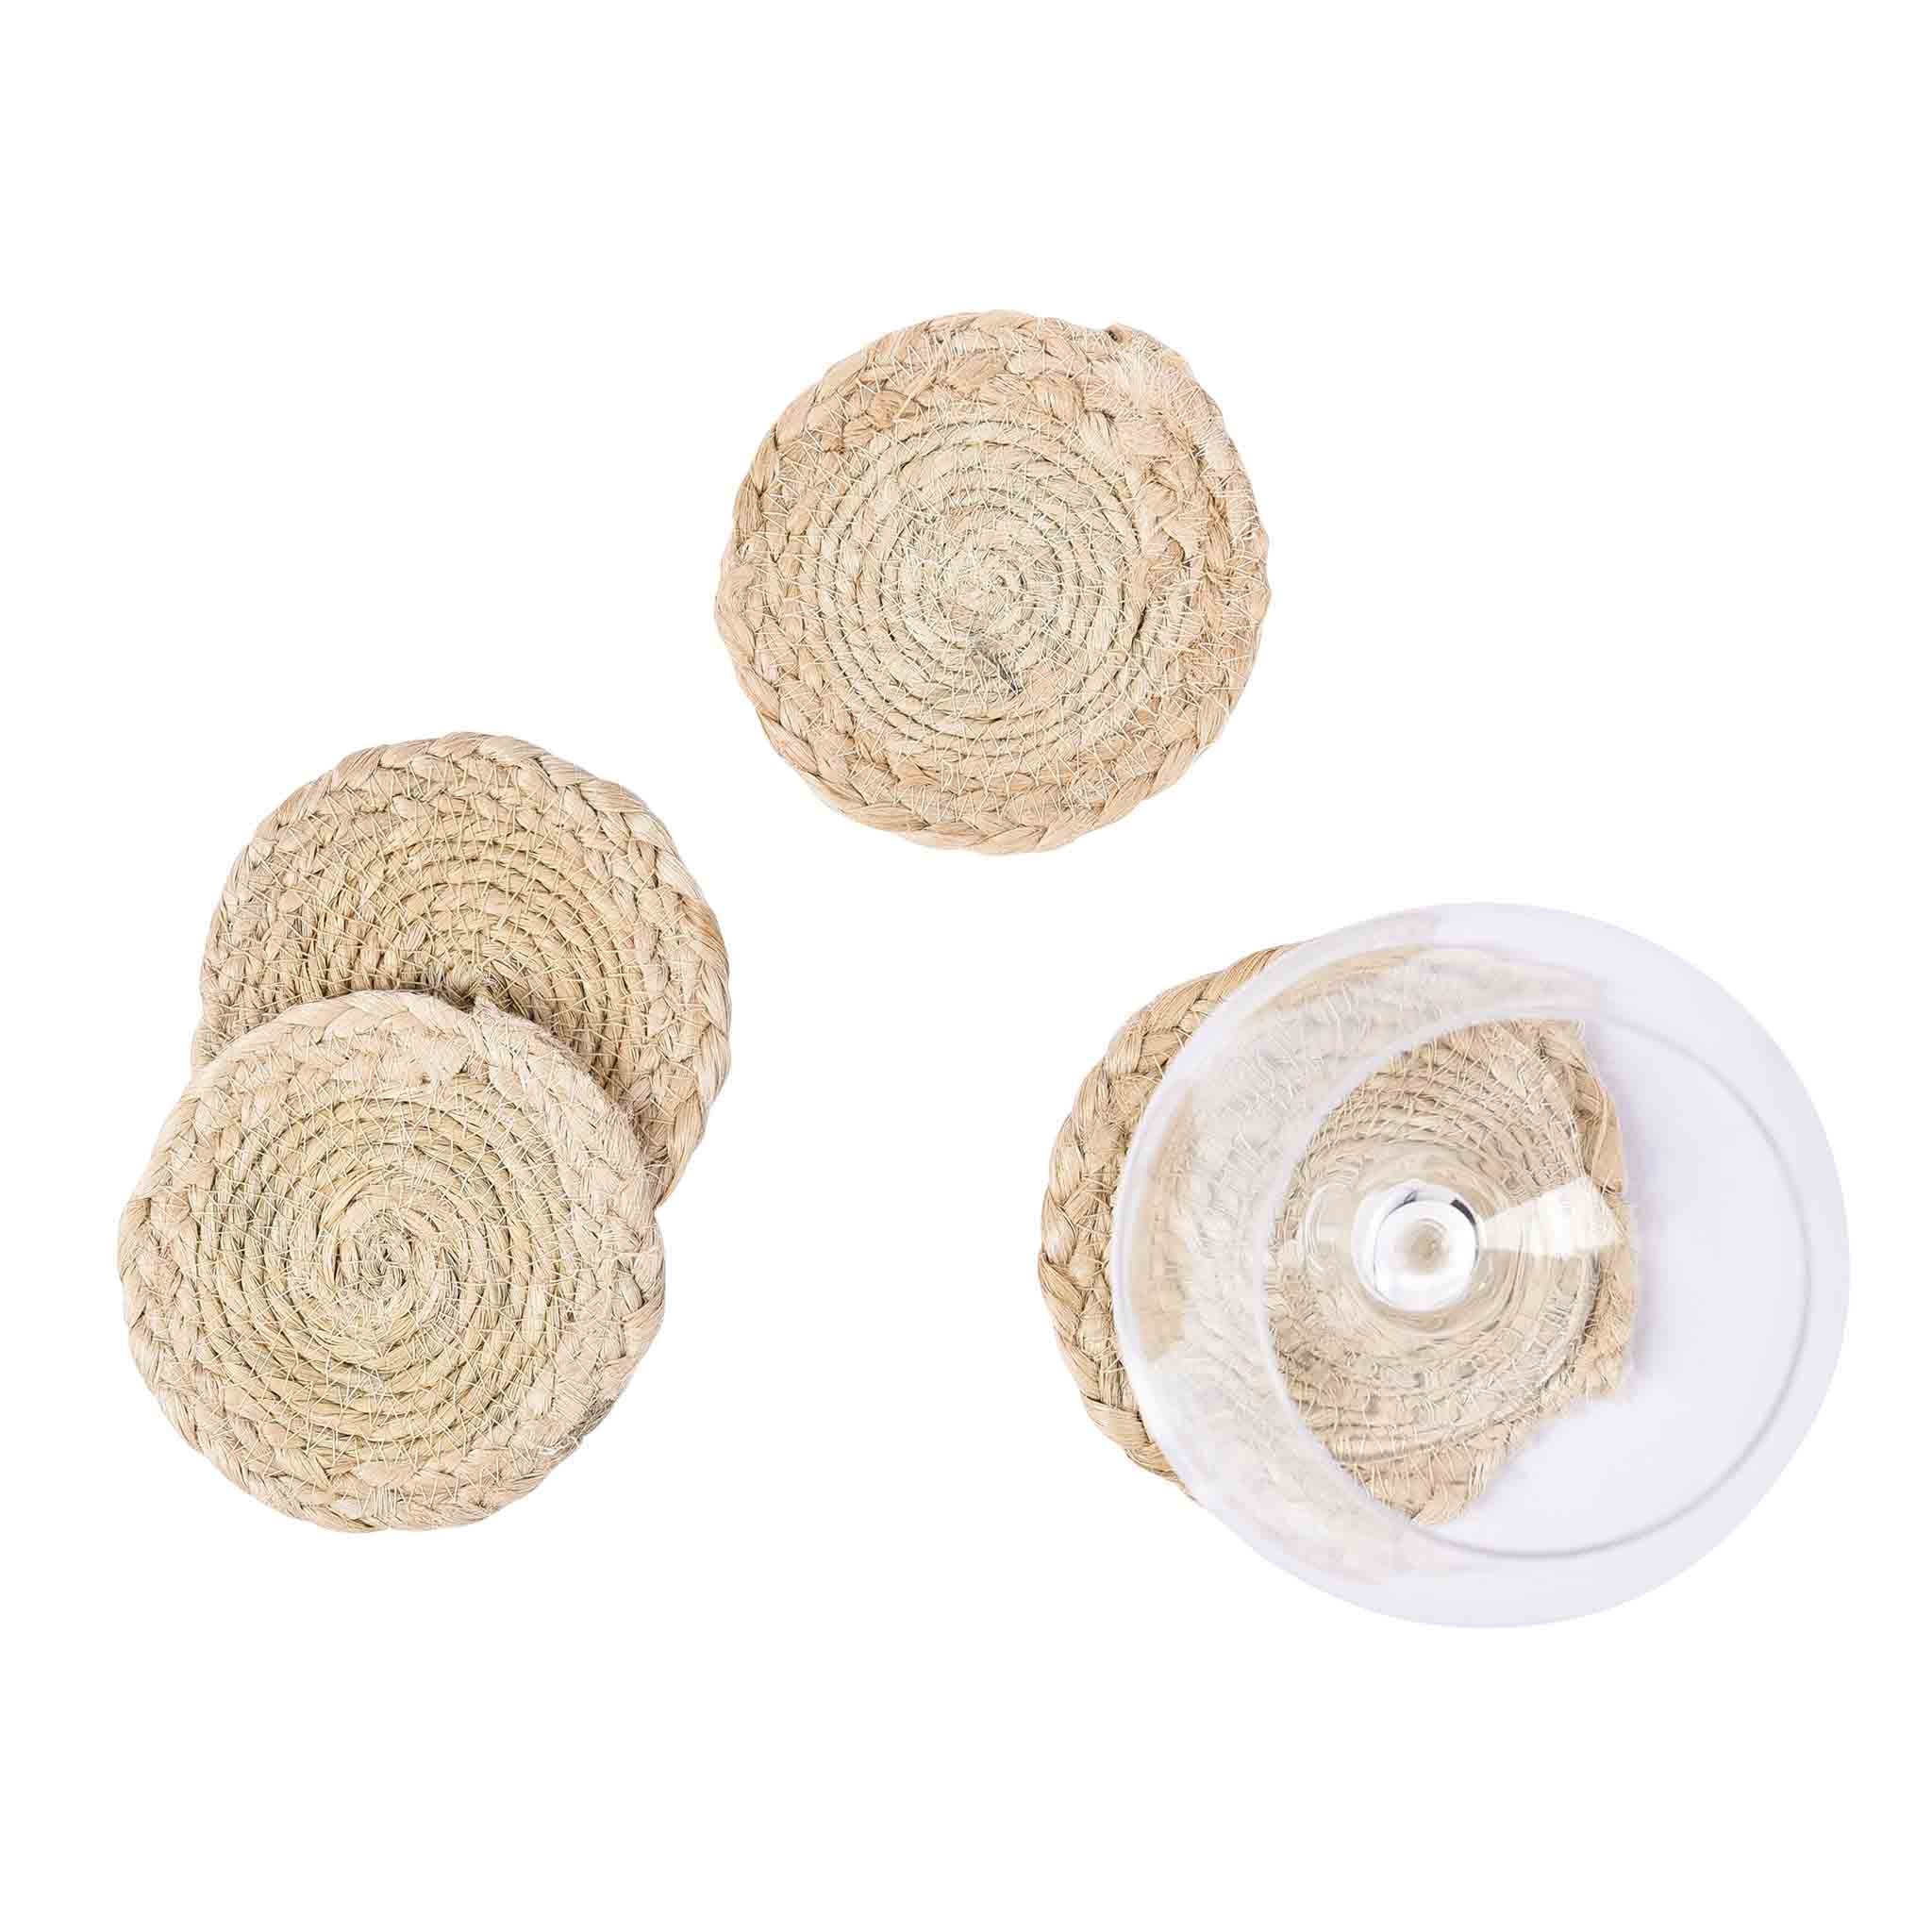 Braided Jute Coaster in Natural, Set of 4